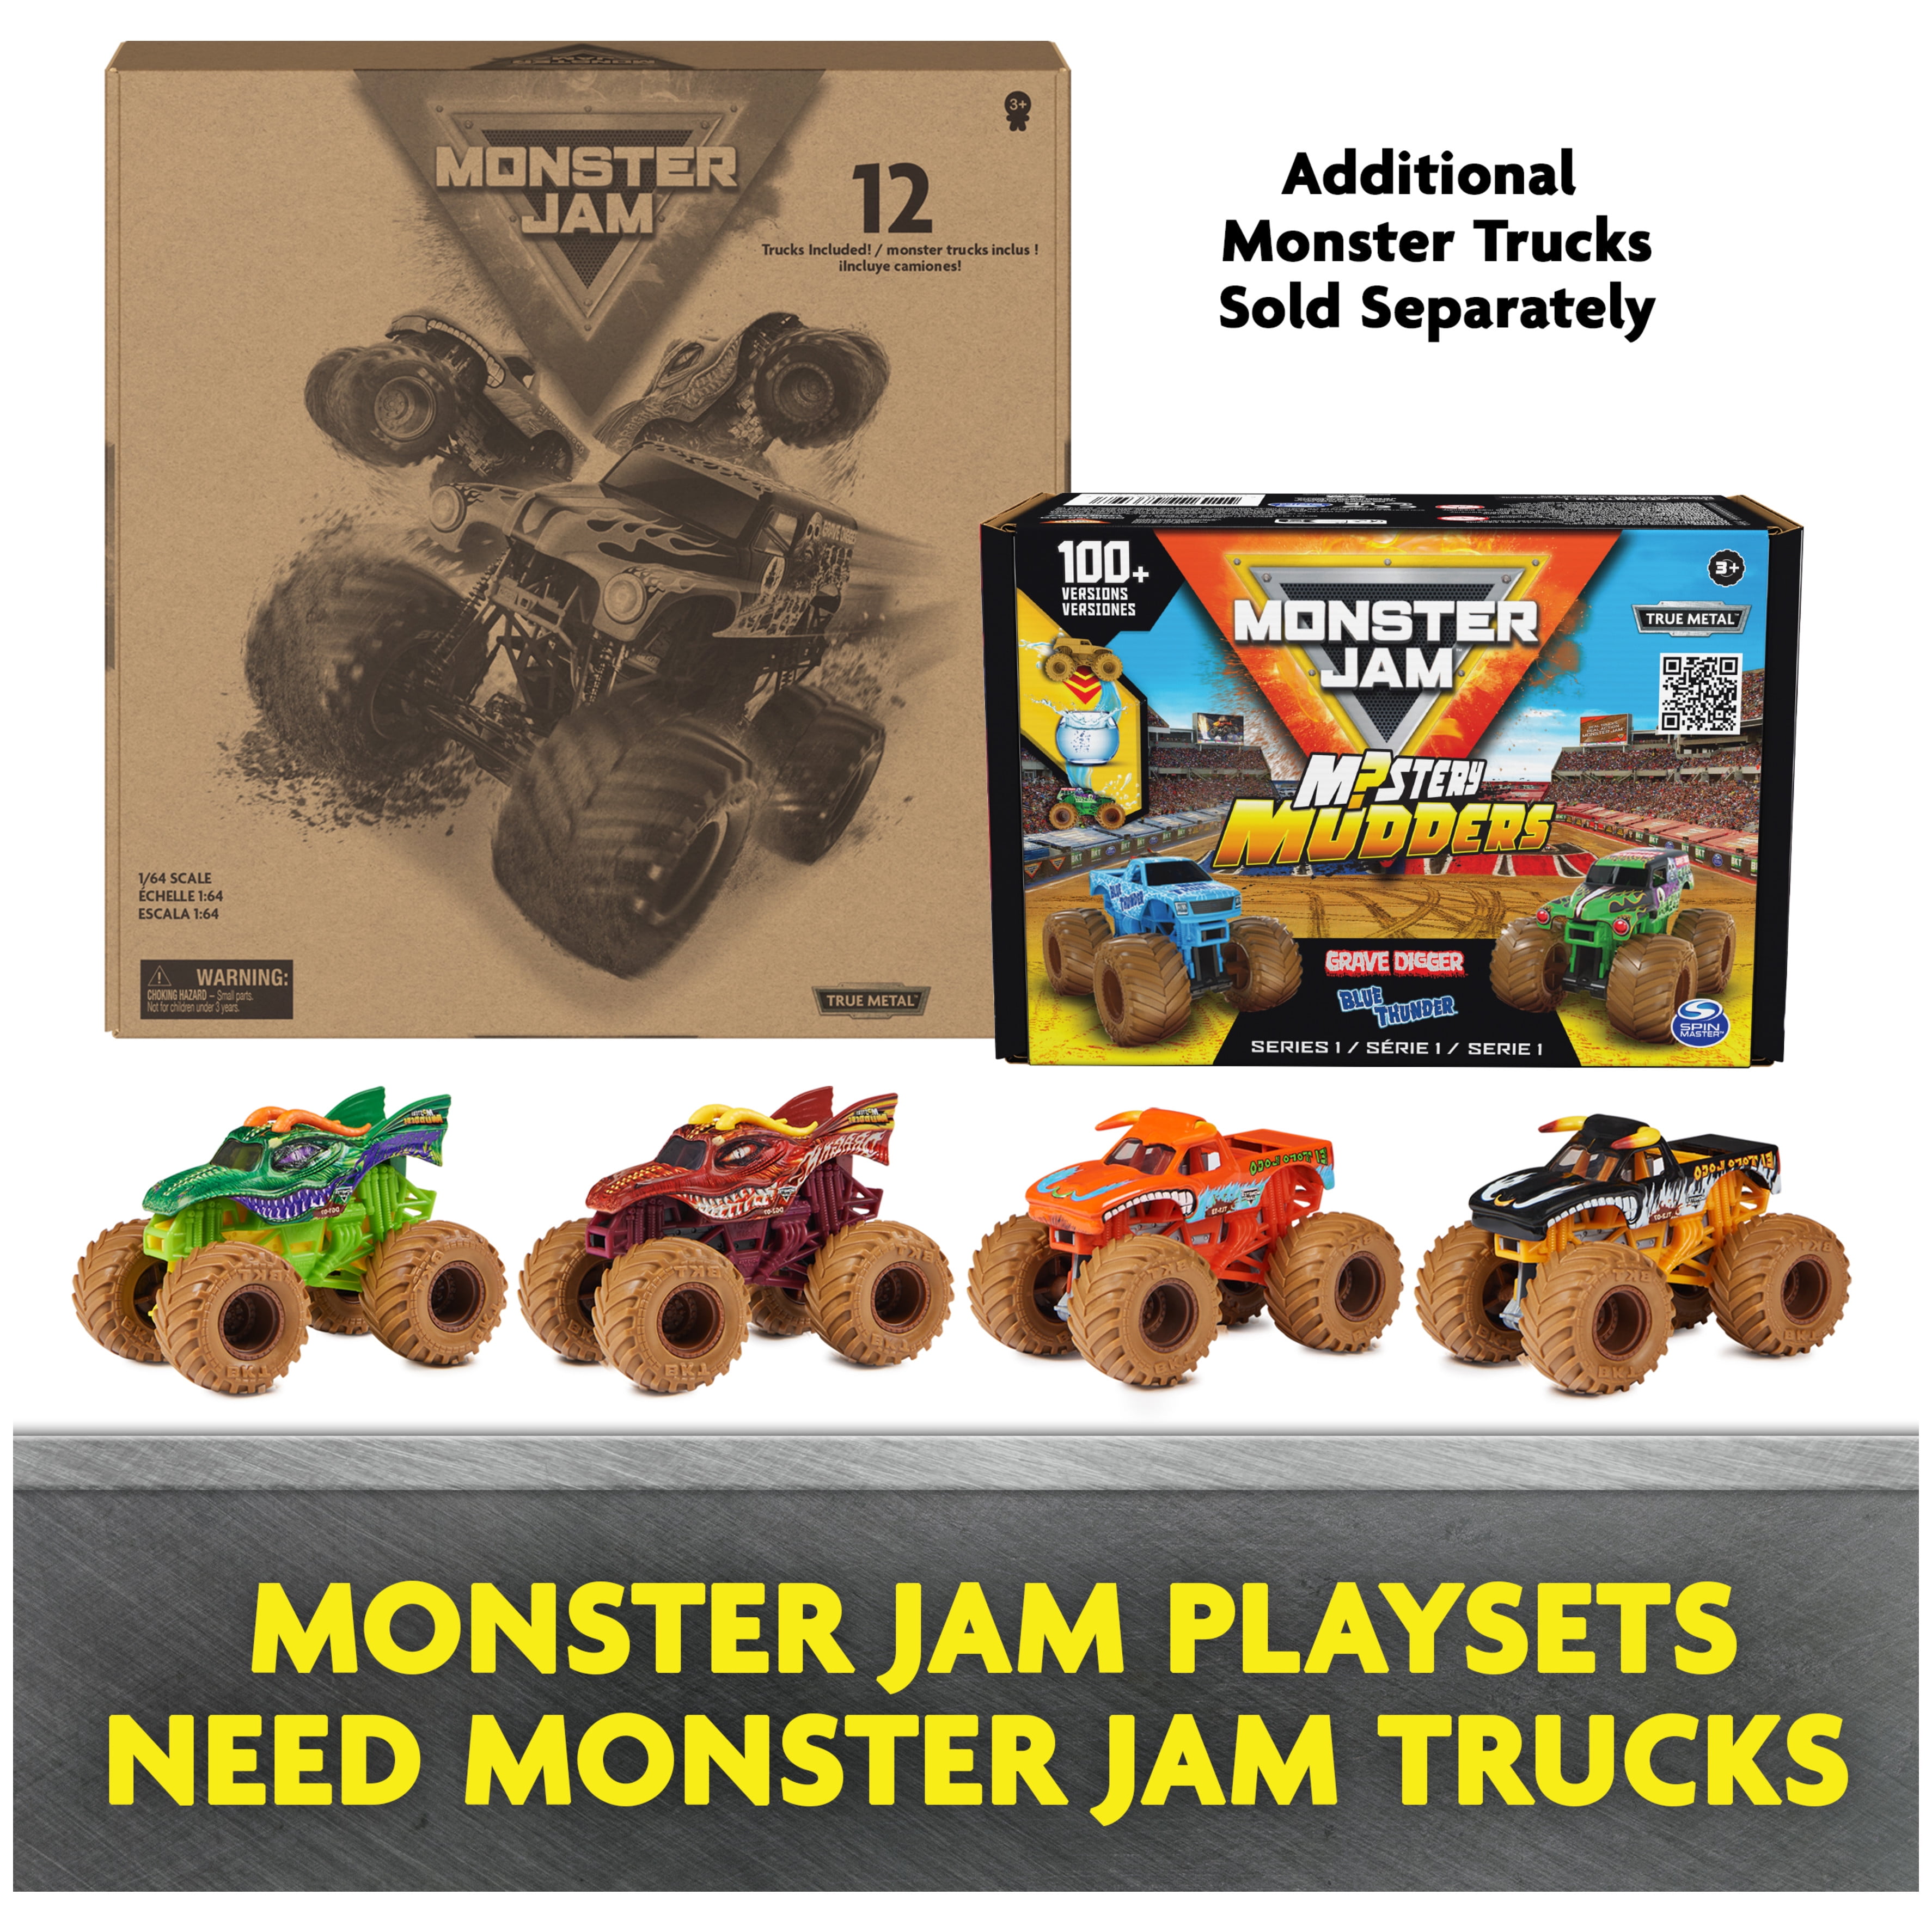 Monster Jam, Megalodon Monster Wash, Includes Color-Changing Megalodon Monster  Truck, Interactive Water Play Kids Toys for Aged 3 and Up 